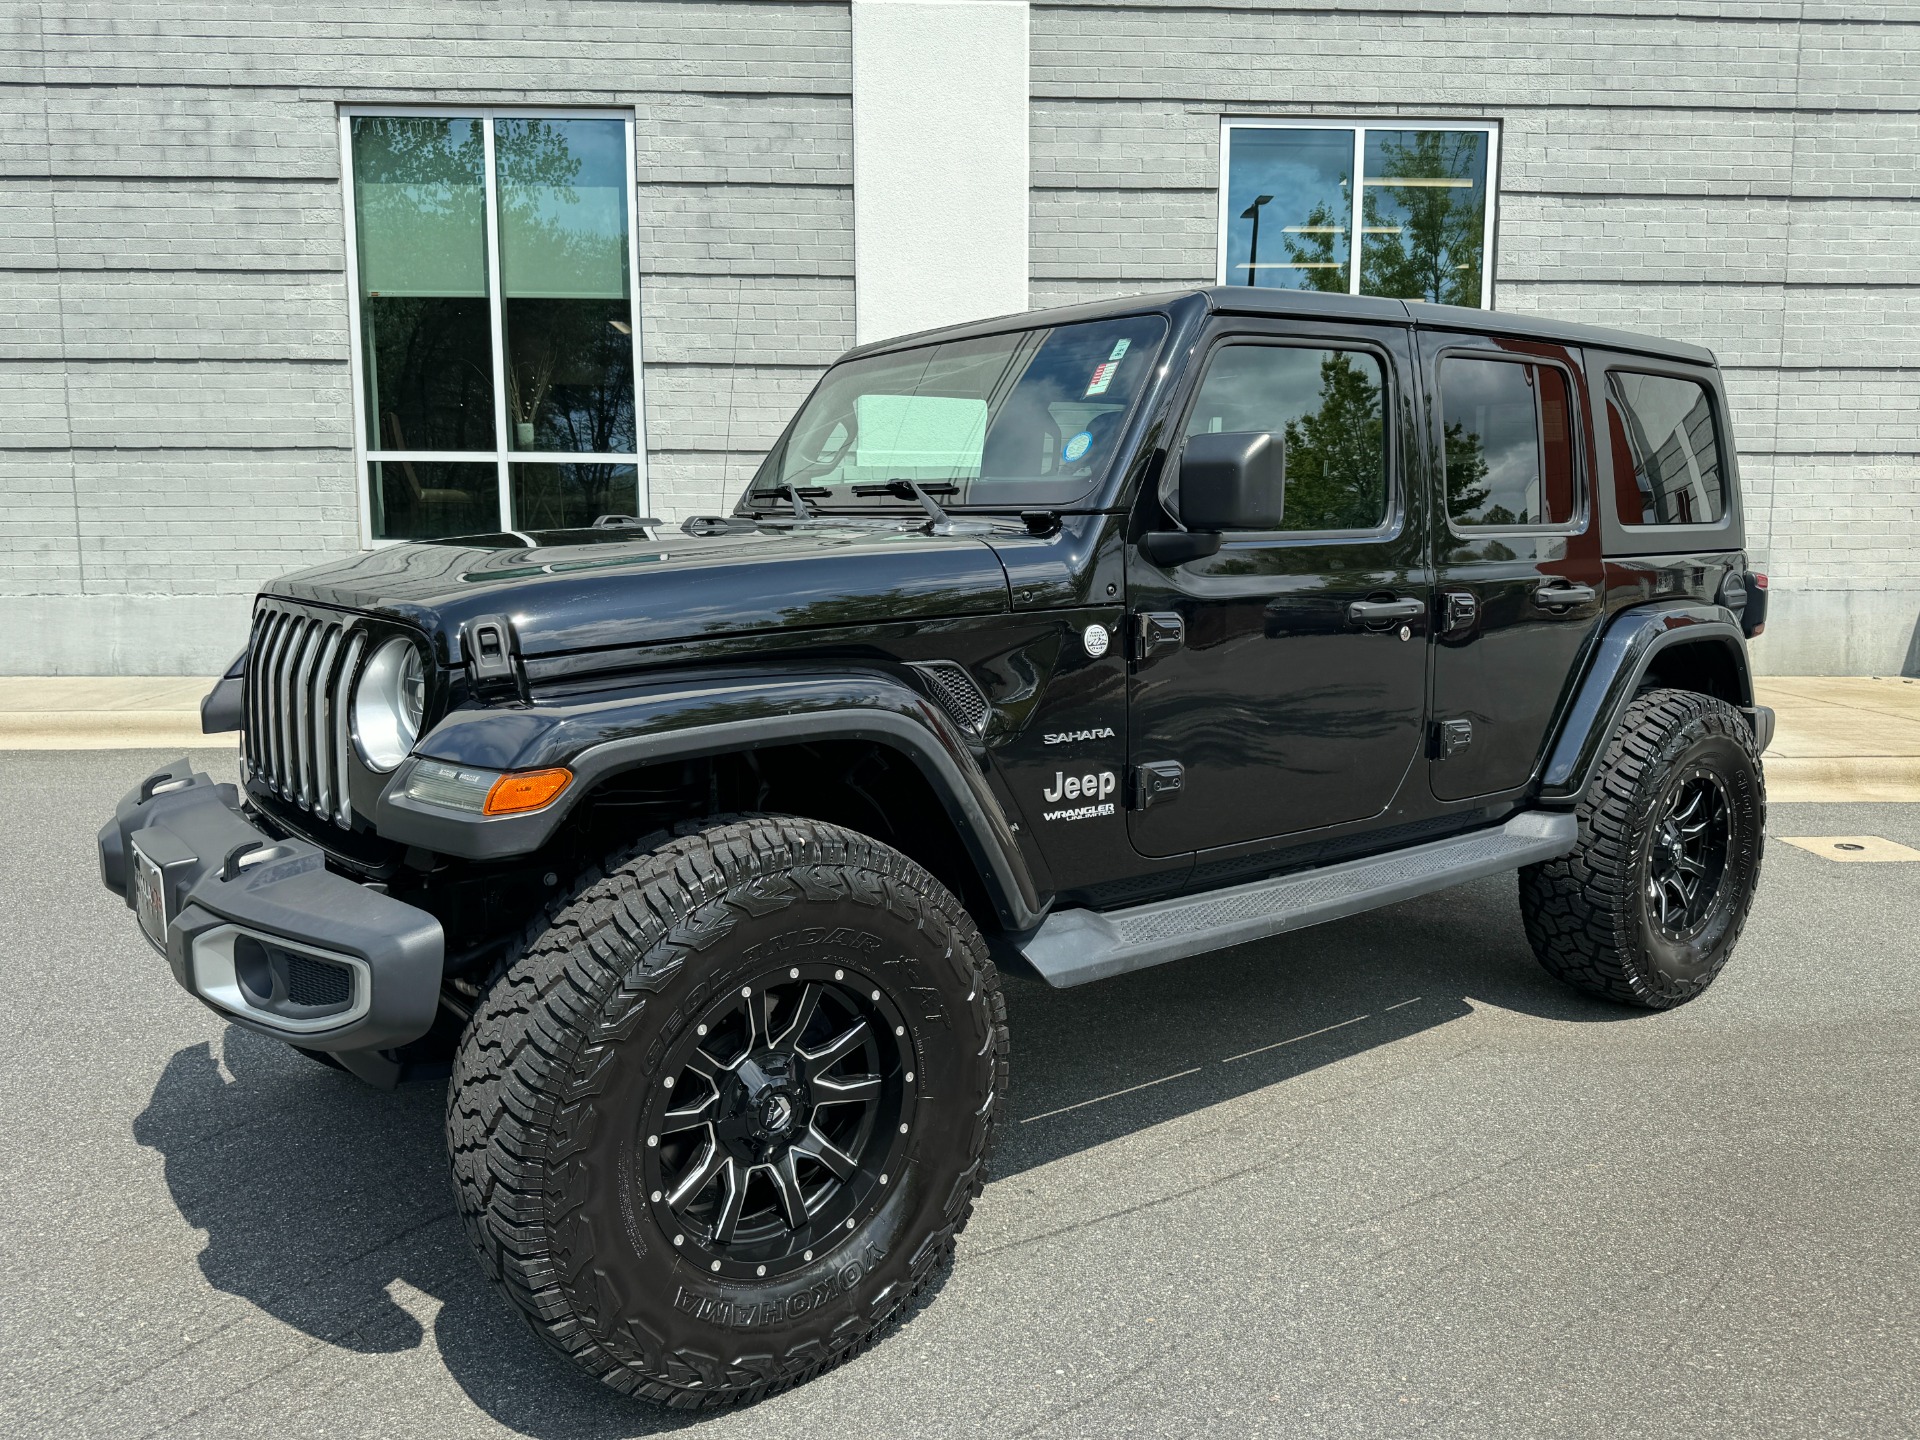 Used 2018 Jeep WRANGLER UNLIMITED SAHARA 4X4 / MANUAL / NAV / ALPINE / FREEDOM TOP / REARVIEW for sale Sold at Formula Imports in Charlotte NC 28227 4